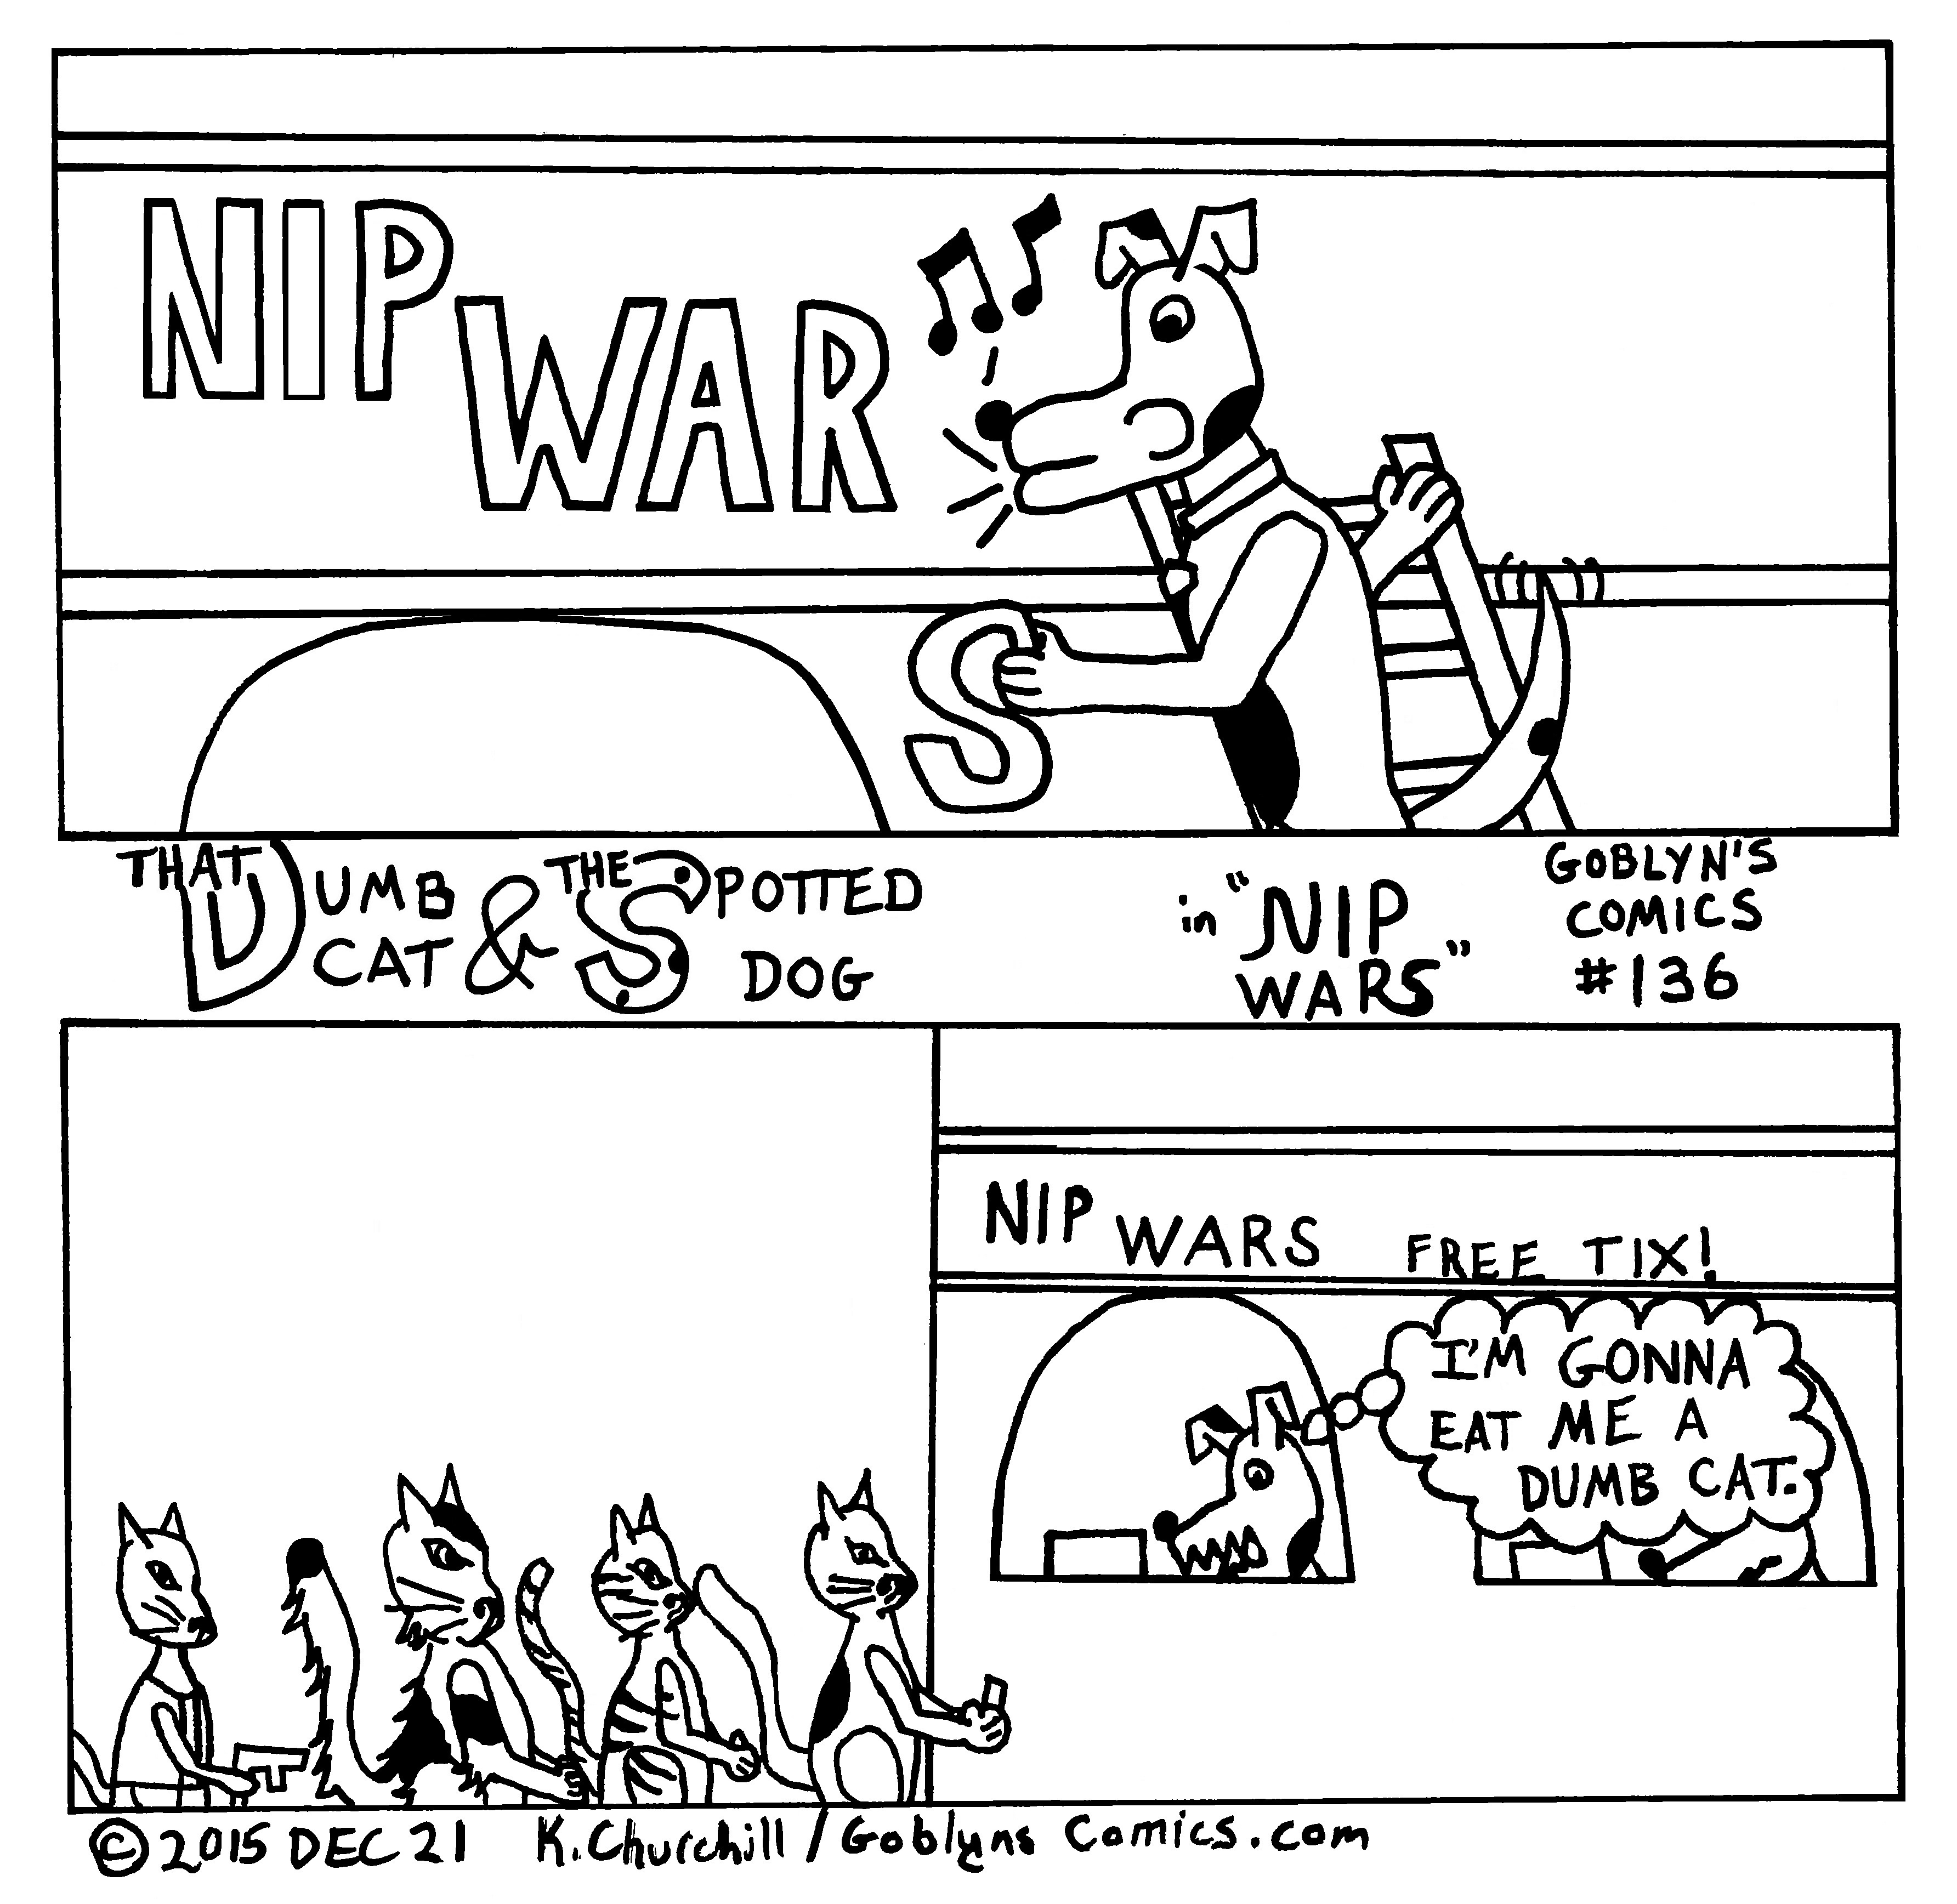 That Dumb Cat & The Spotted Dog in "Nip Wars"